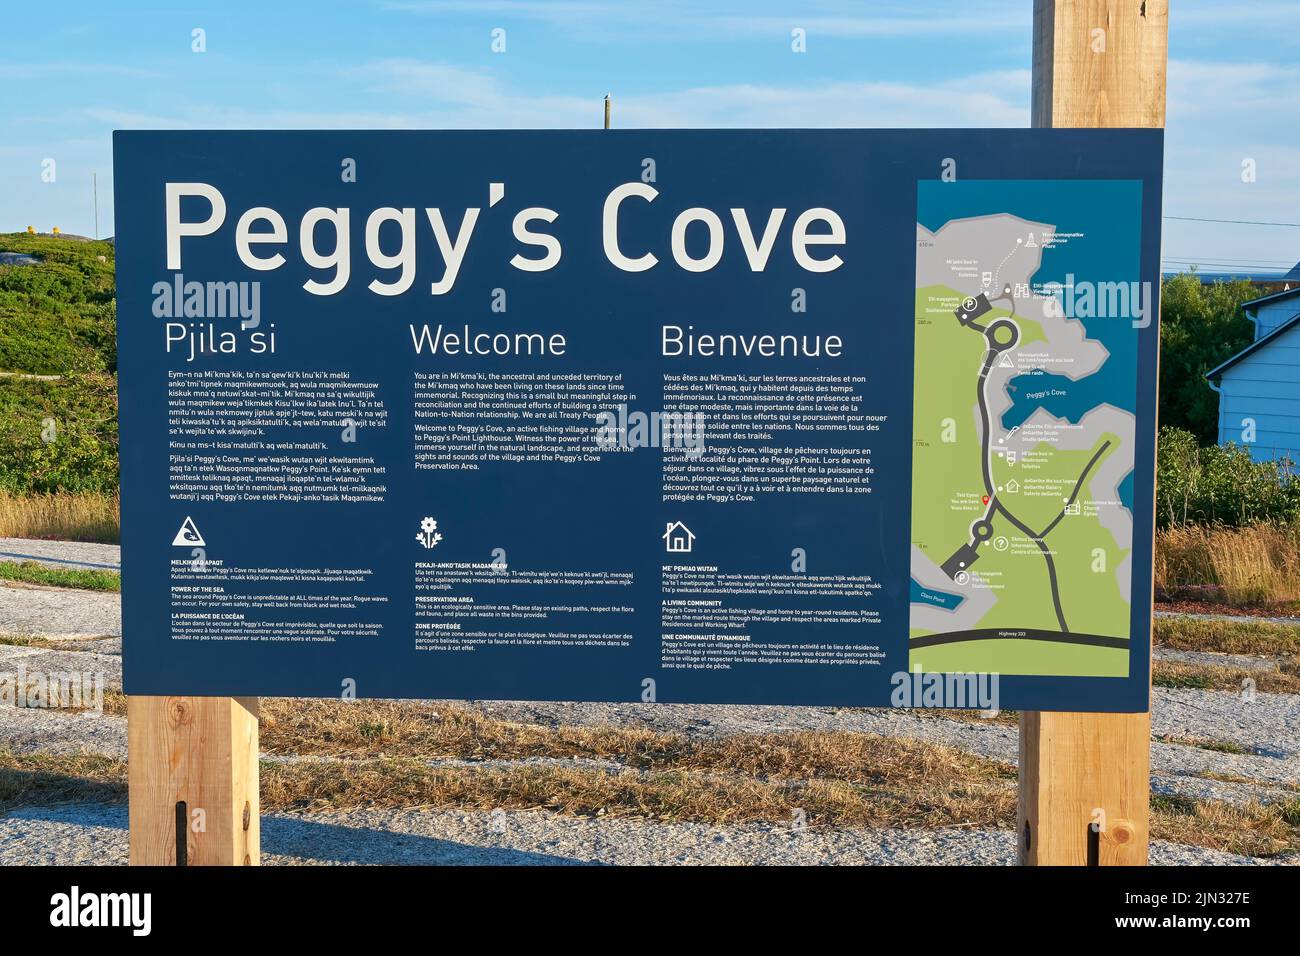 Sign welcoming vistors in three languages as you enter Peggy's Cove Nova Scotia.  The languages incluse Mi'kma'ki, English and French. Stock Photo